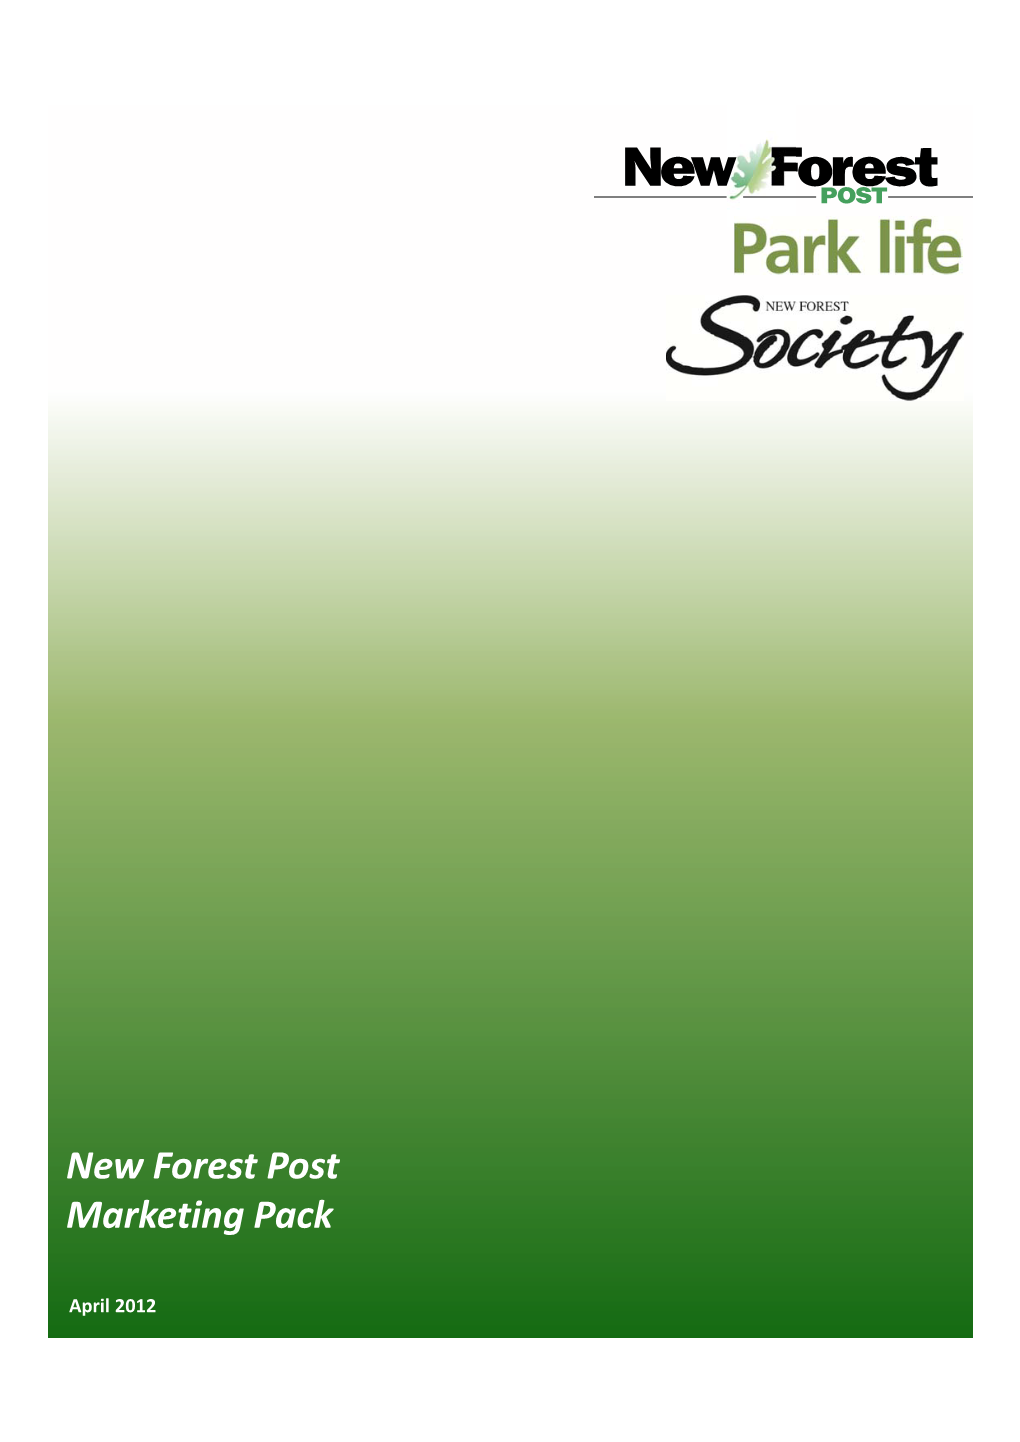 New Forest Post Marketing Pack